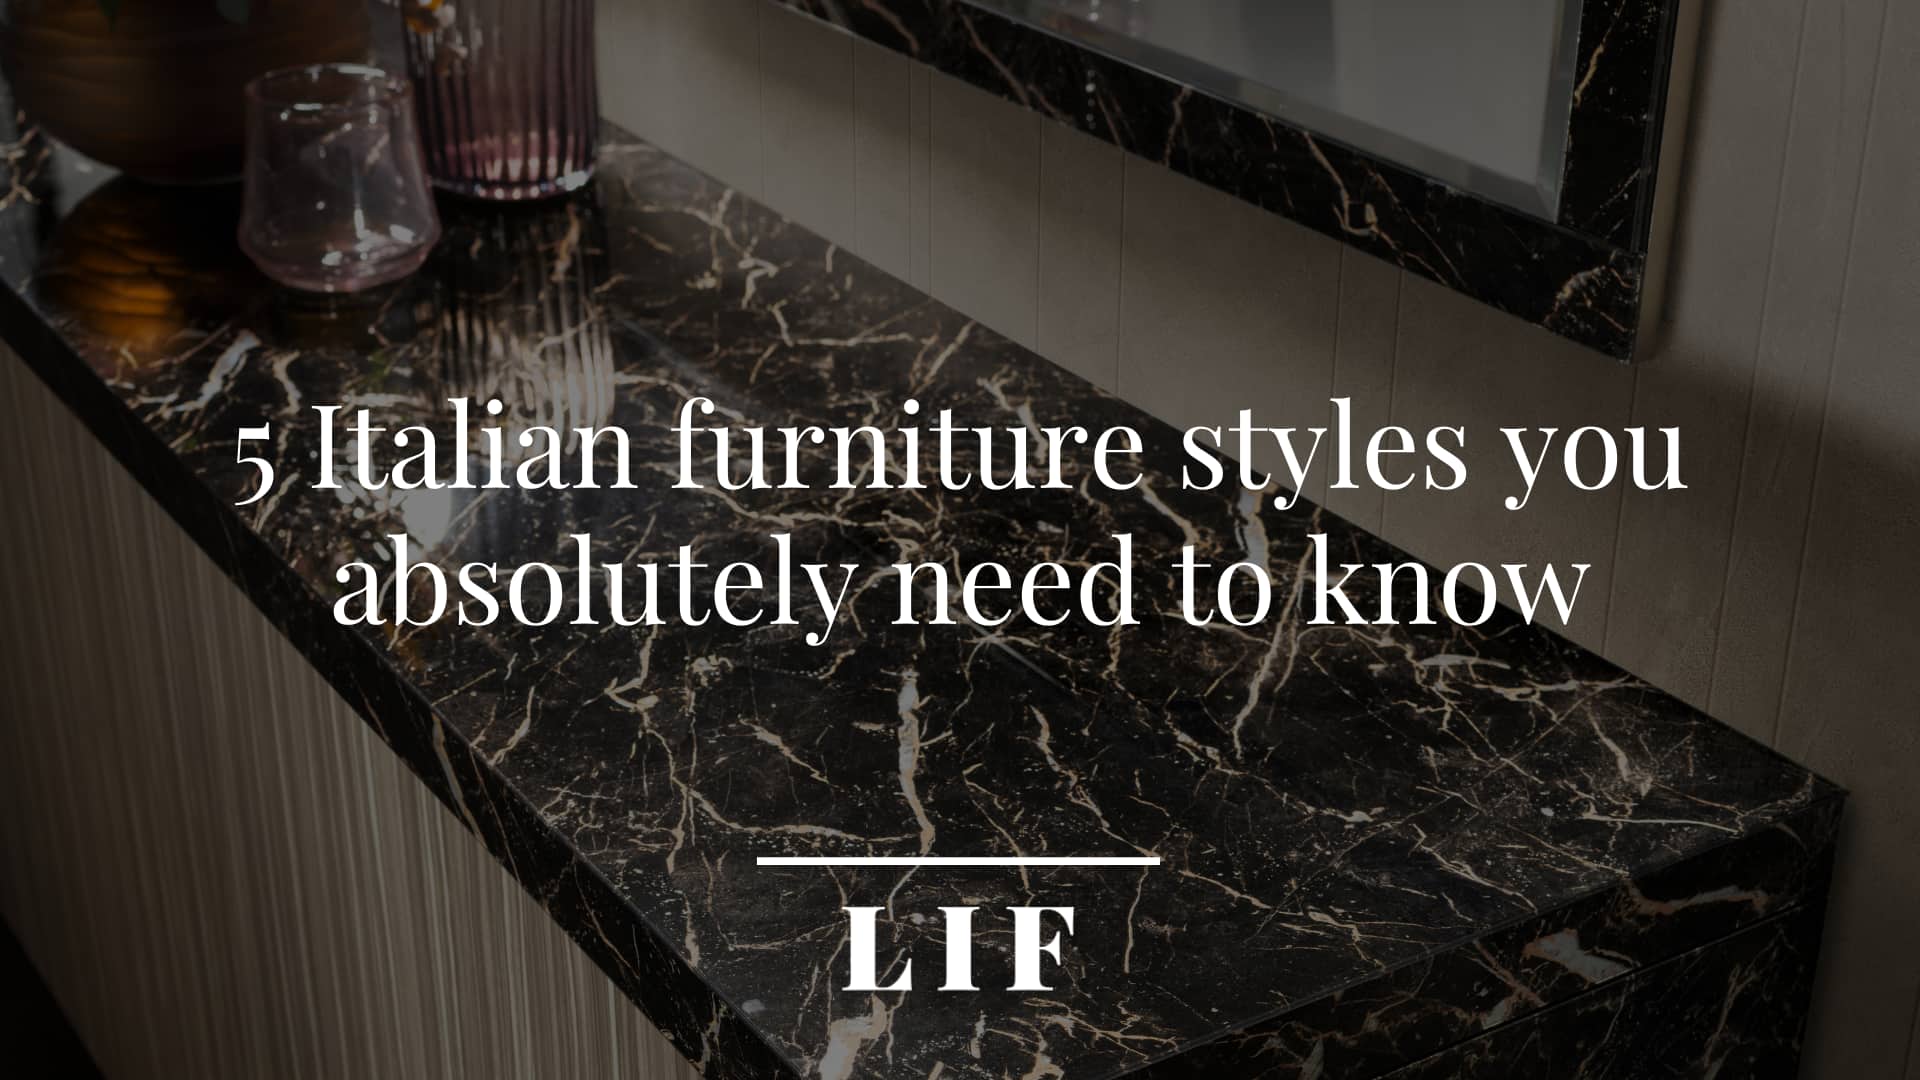 5 Italian furniture styles you absolutely need to know